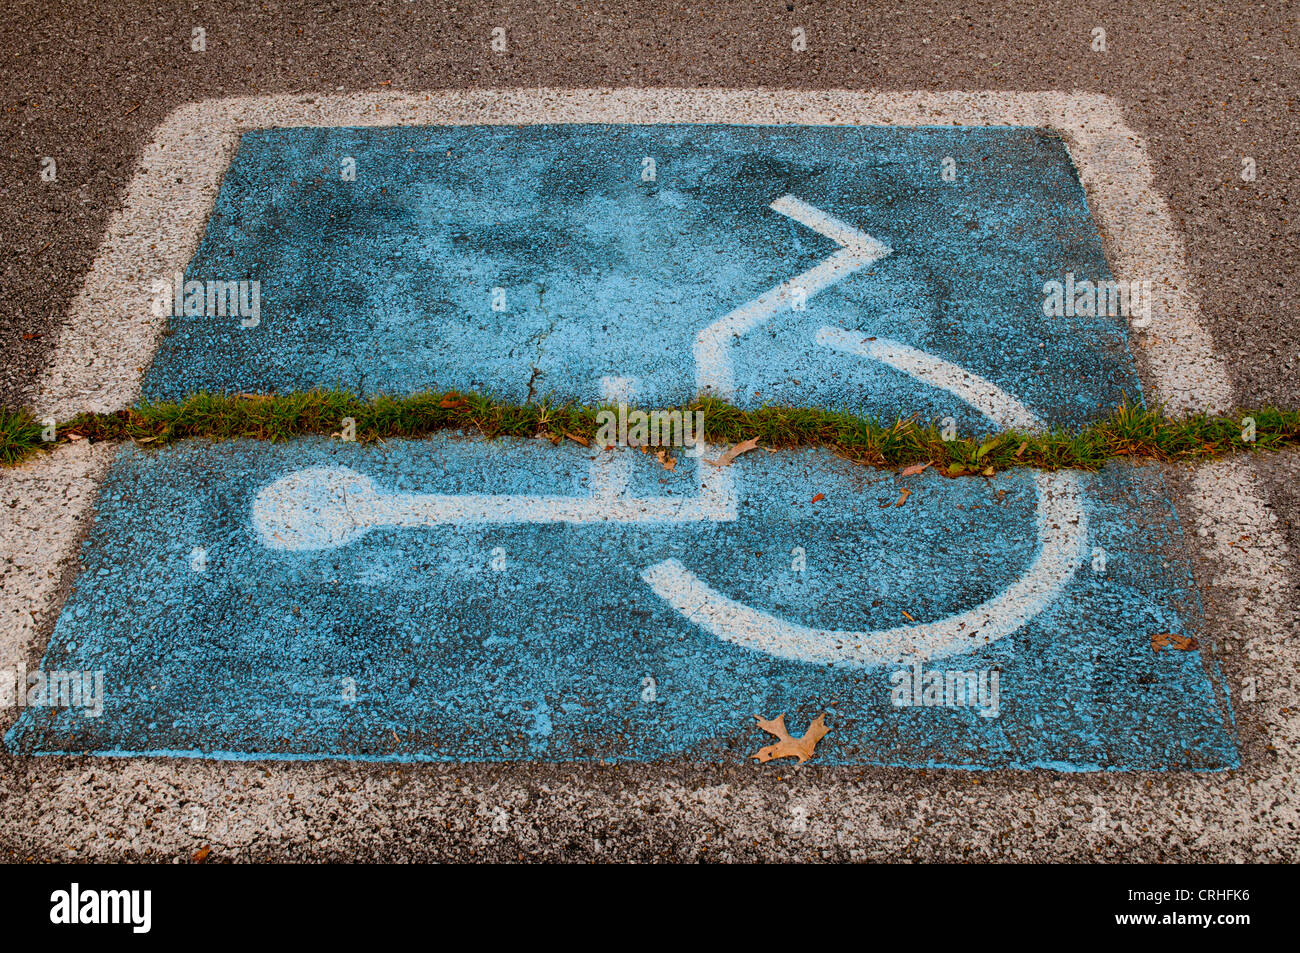 Handicap wheel chair symbol painted on parking space with grass growing through it Stock Photo